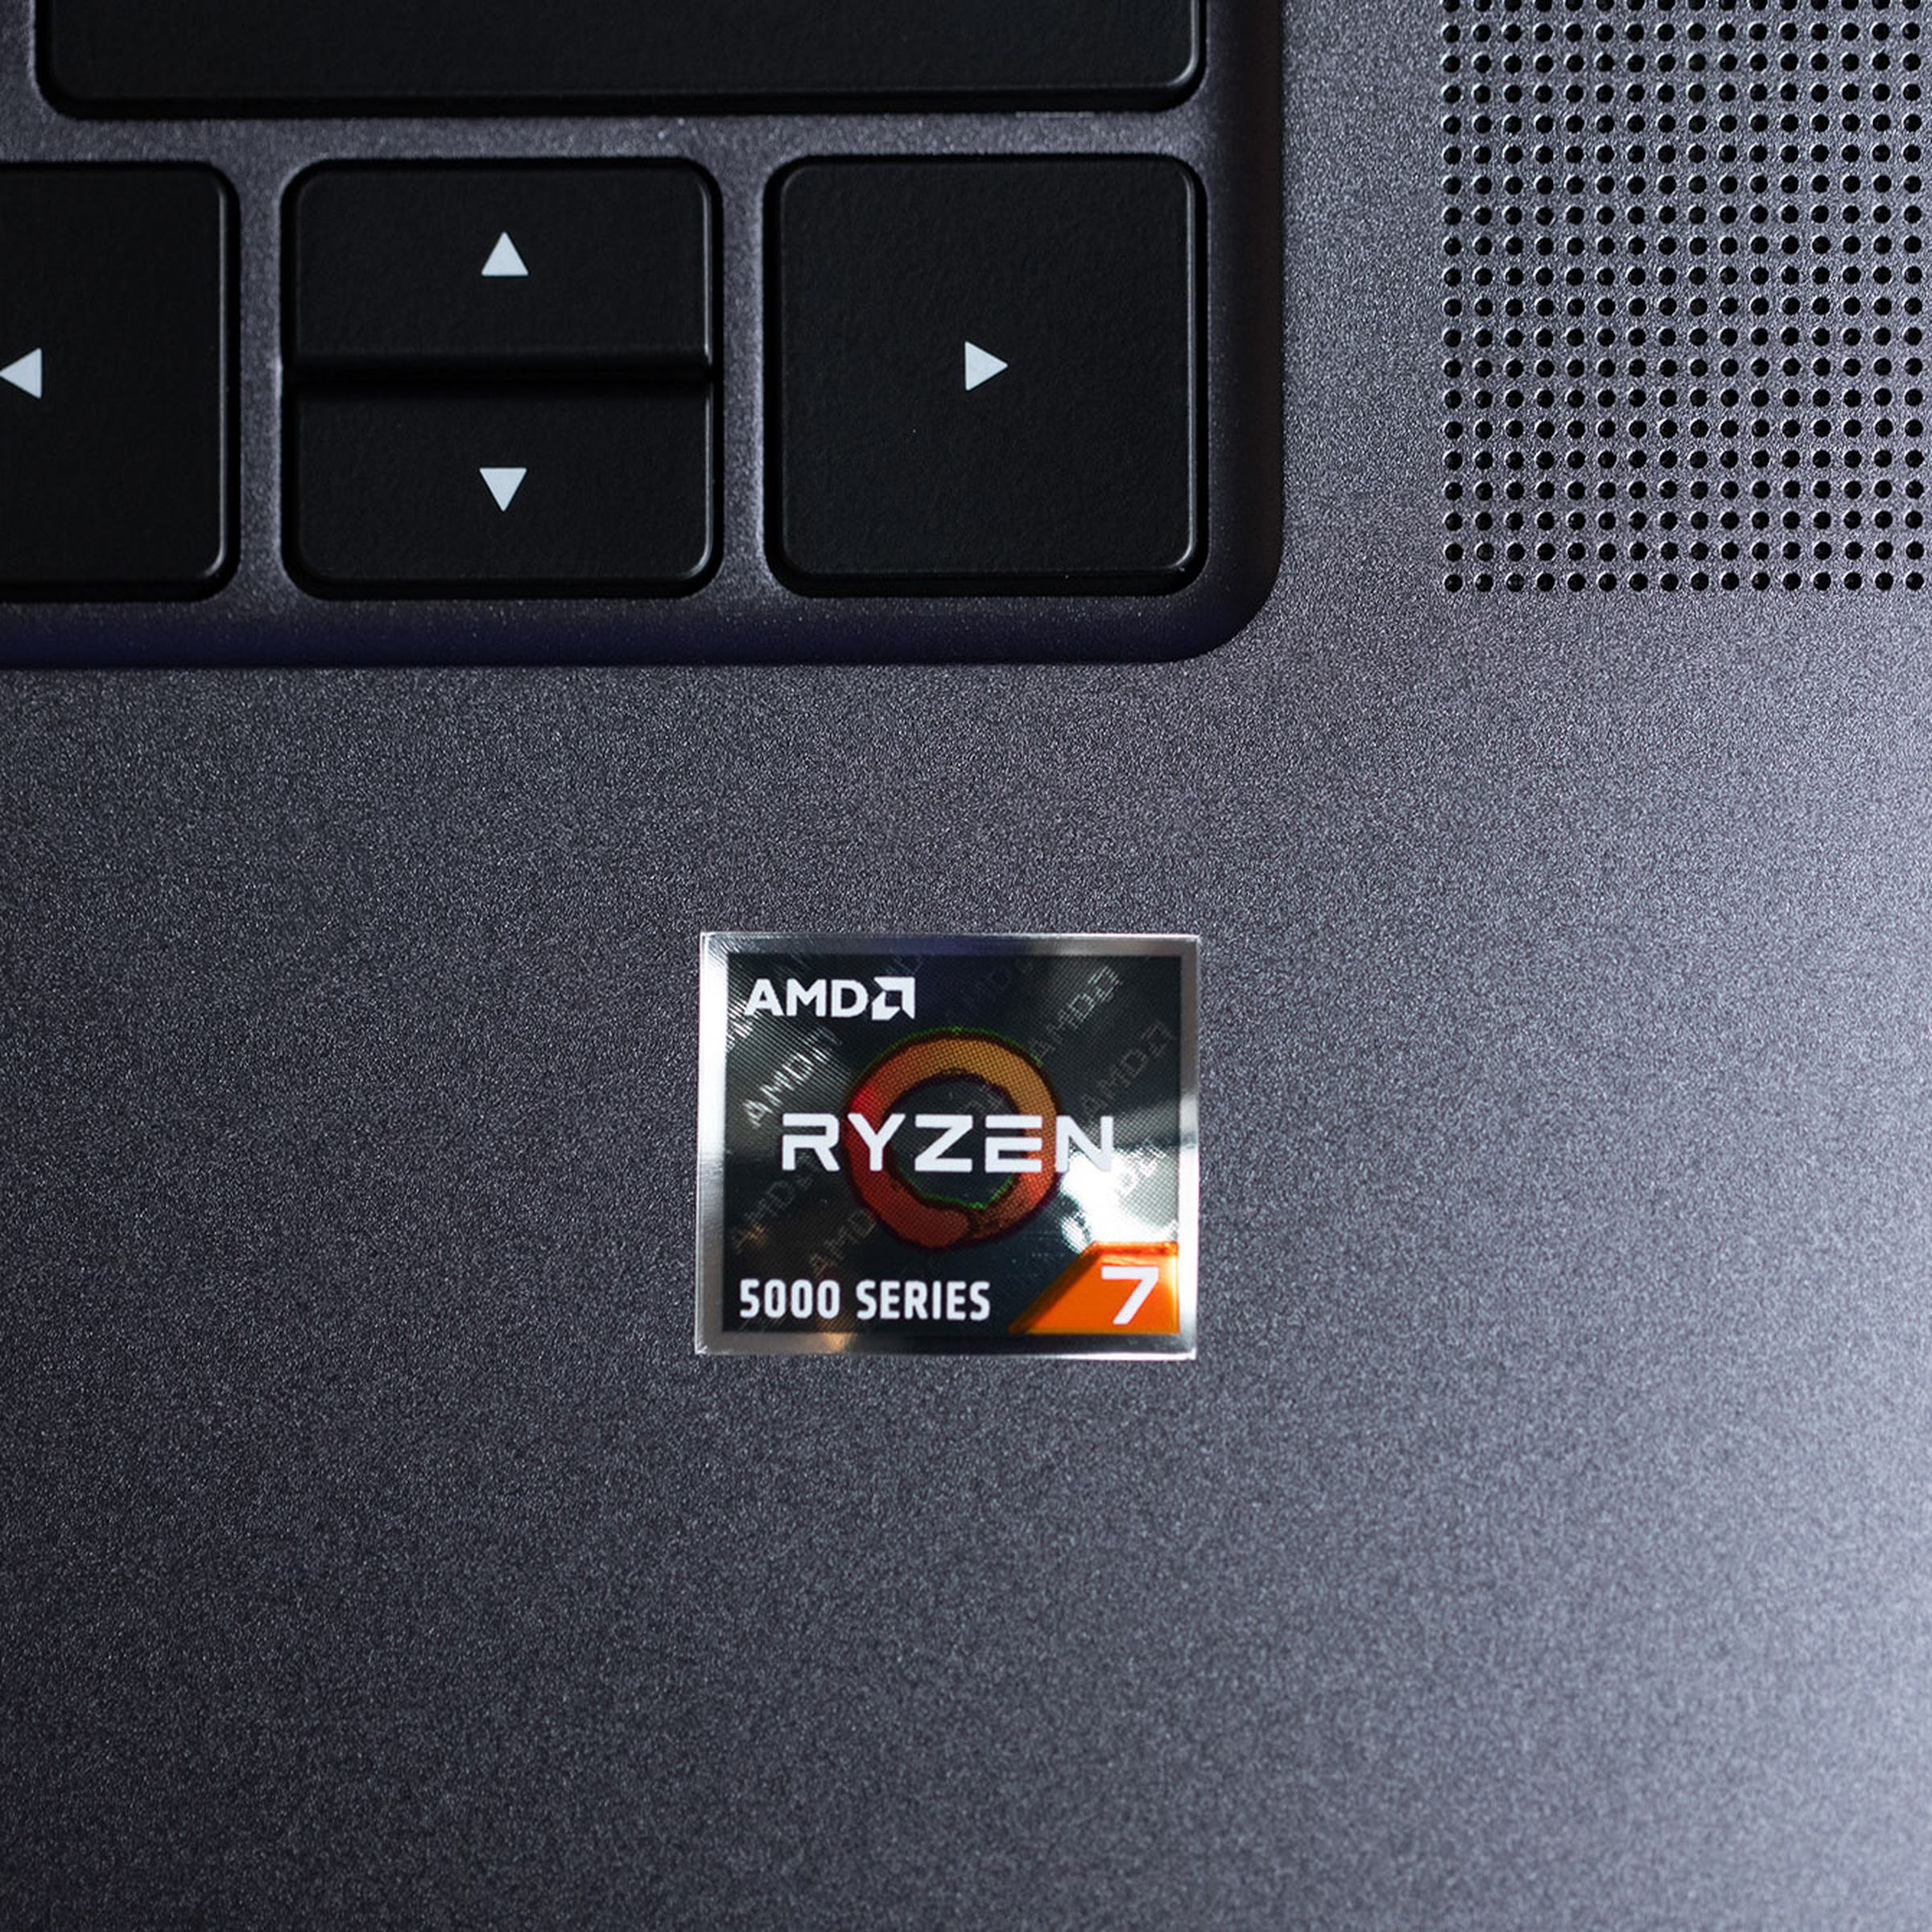 The AMD Ryzen 7 sticker on the right palm rest of the Huawei MateBook 16.